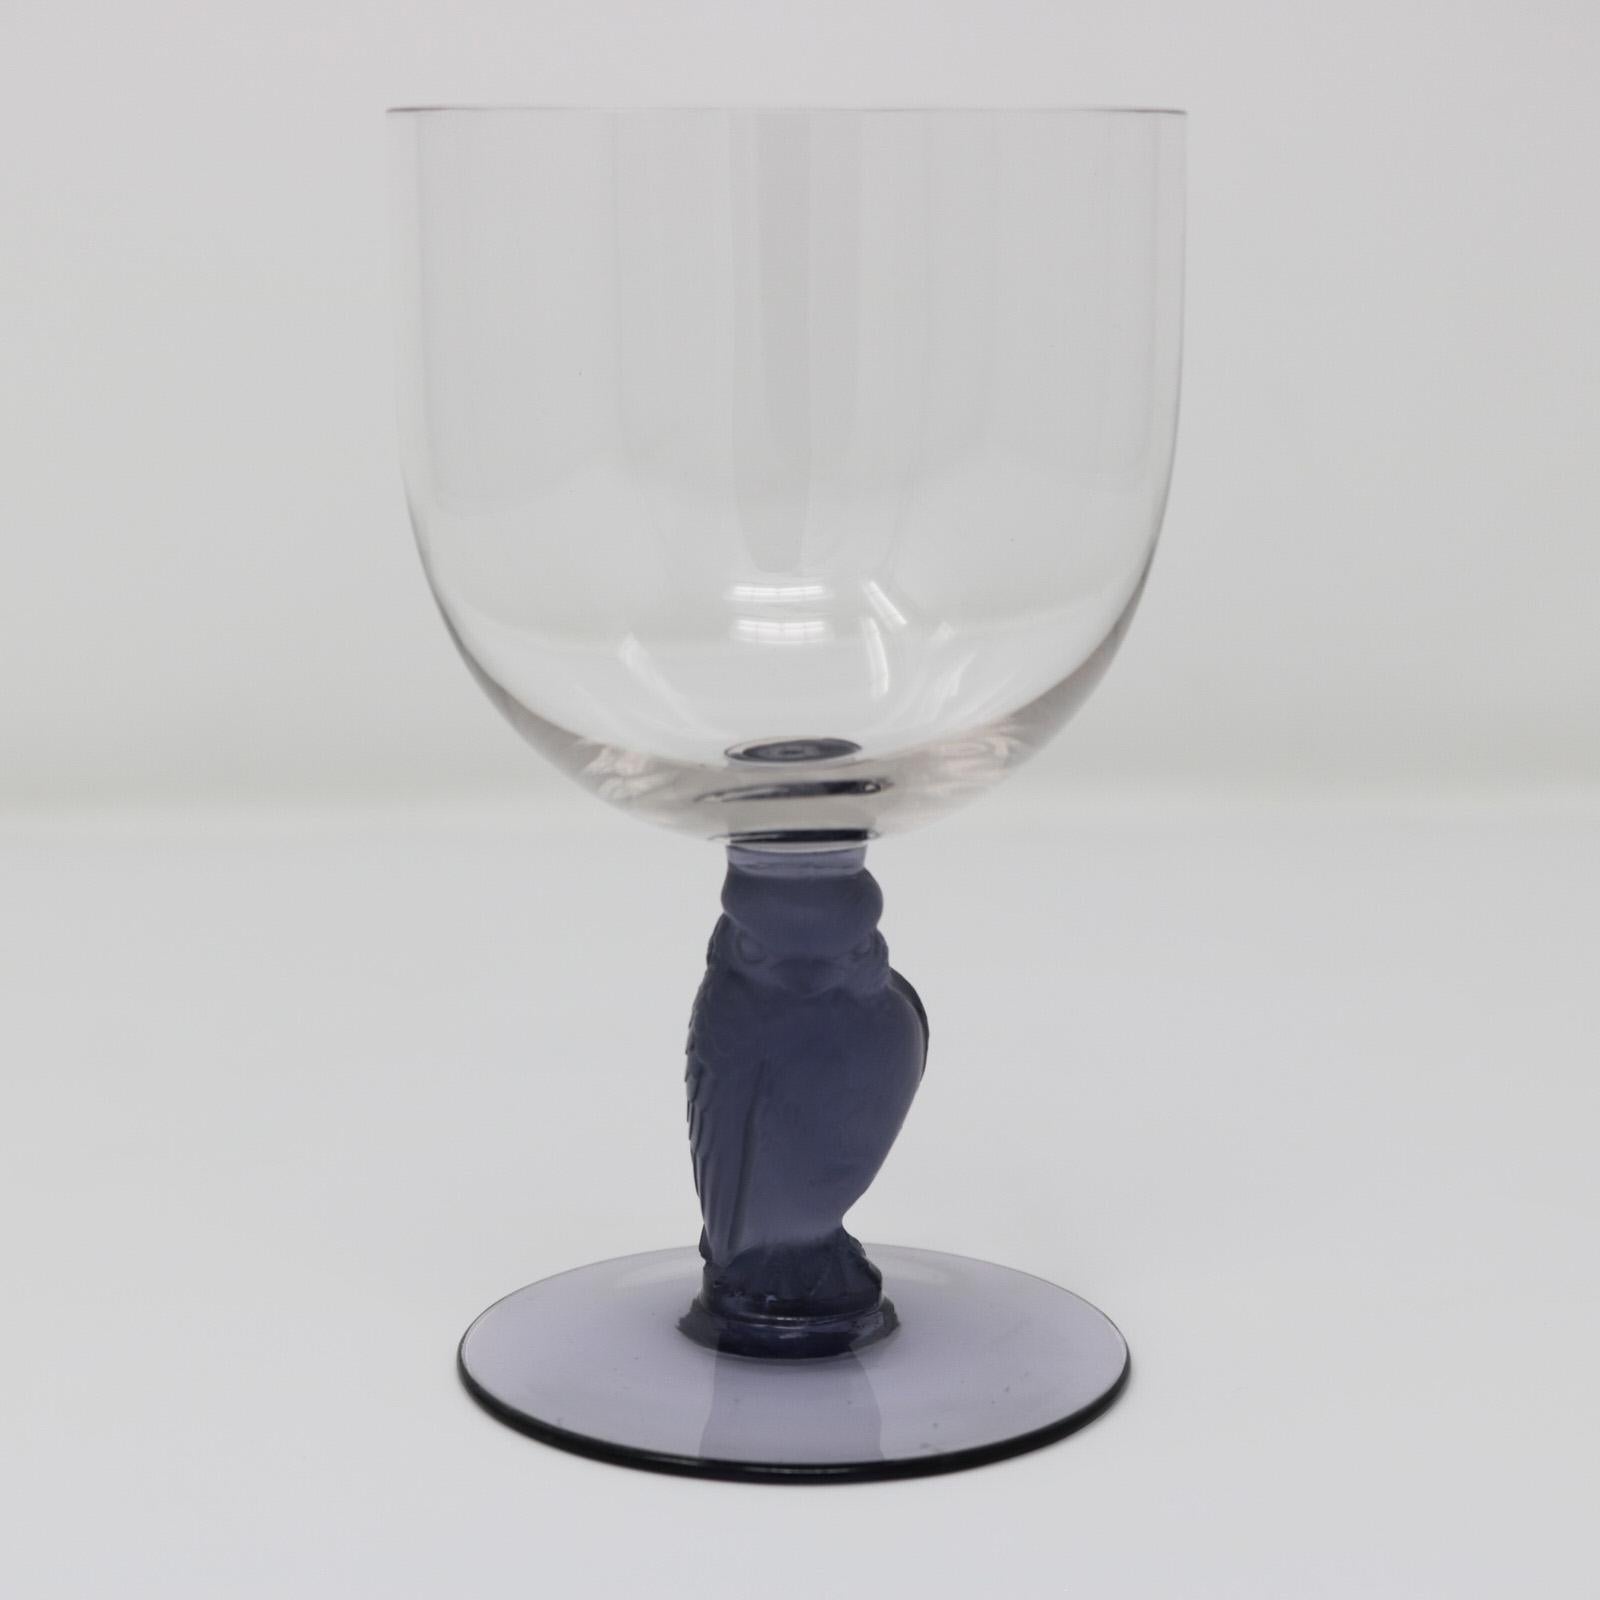 Rene Lalique glass 'Rapace' drinking glass. Clear glass bowl and foot. Blue glass stem modelled in the form of a raptor bird (by direct translation of rapace). Engraved makers mark, 'R Lalique France'. Book reference: Marcilhac page 805, reference N.